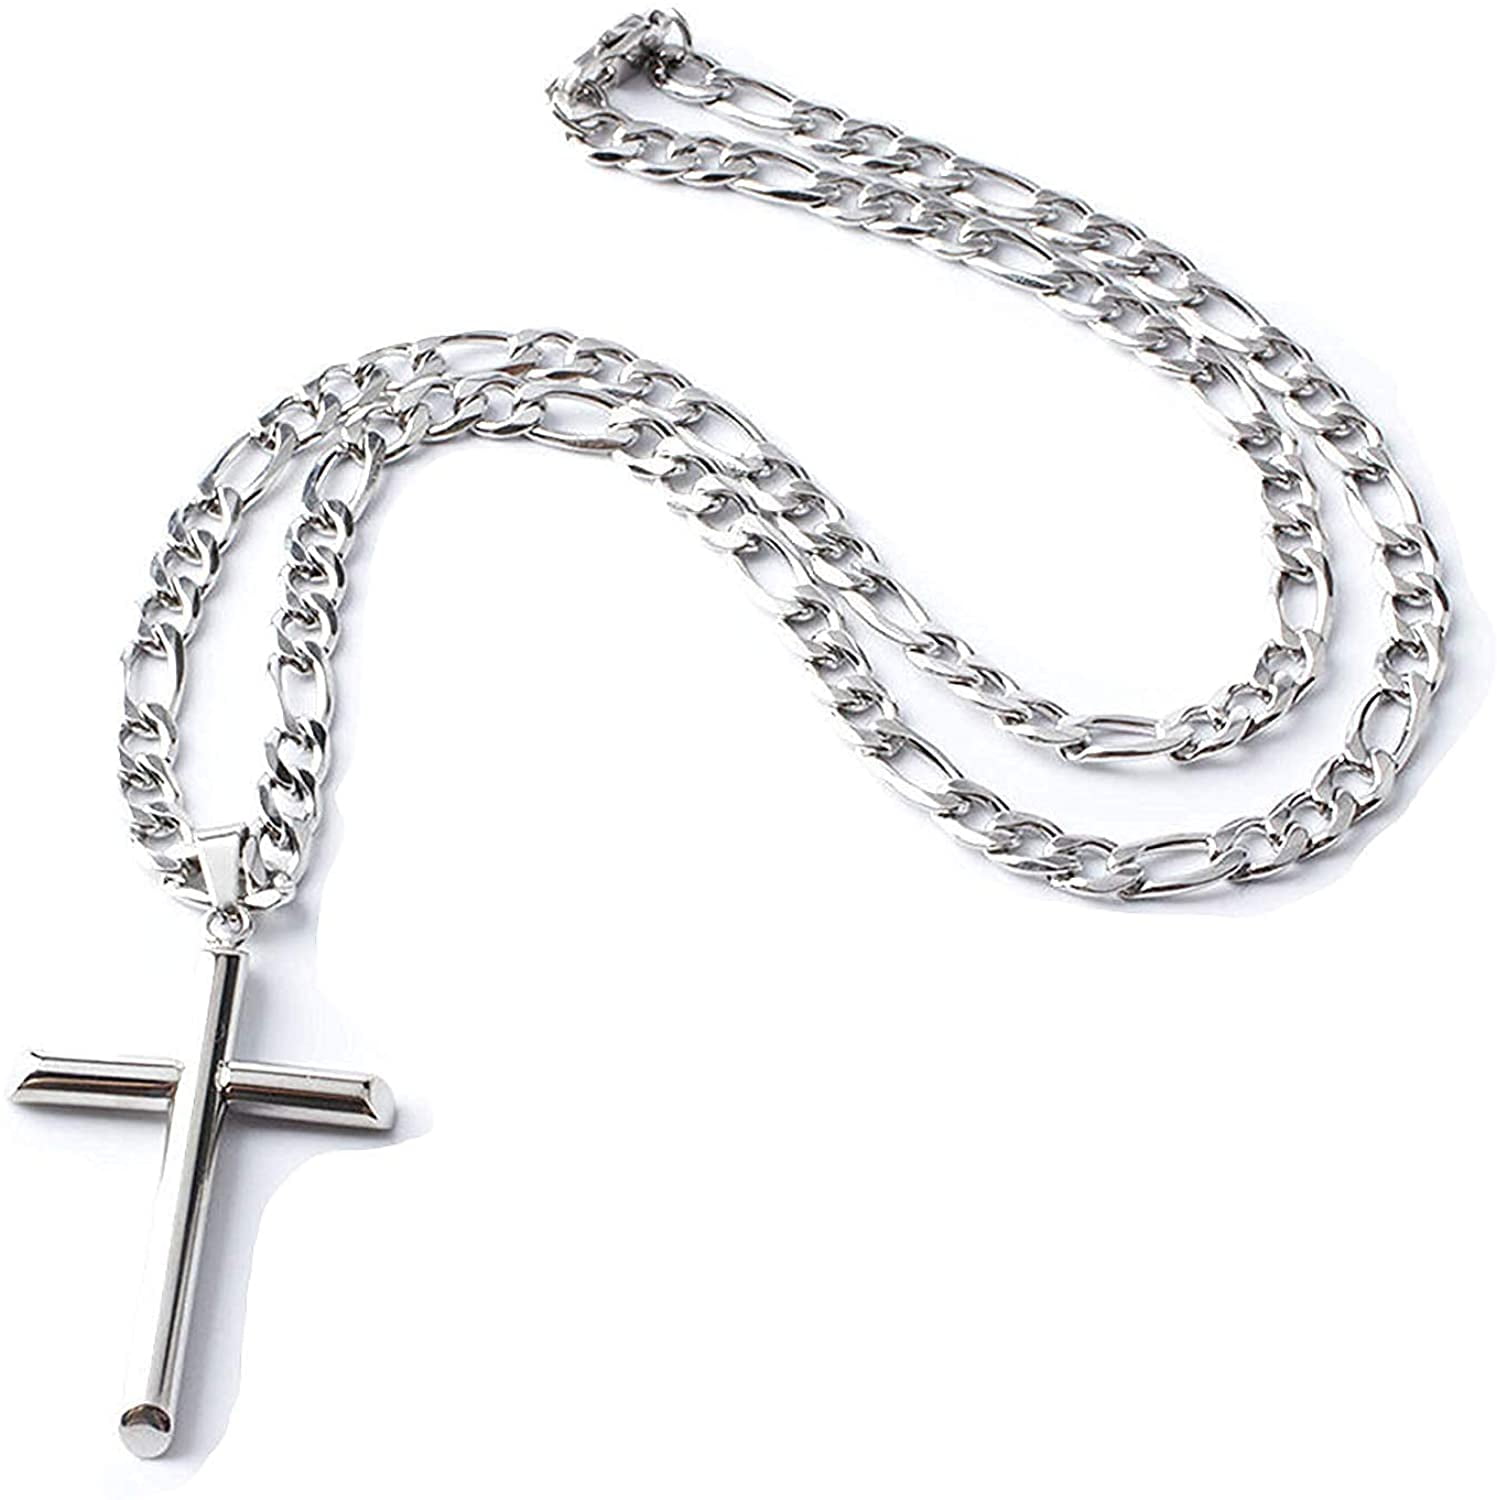 24K Gold Chain Style Cross Pendant Necklace Solid Clasp for Men,Women,Teens Thin for Charms Miami Cuban Link Diamond Cut